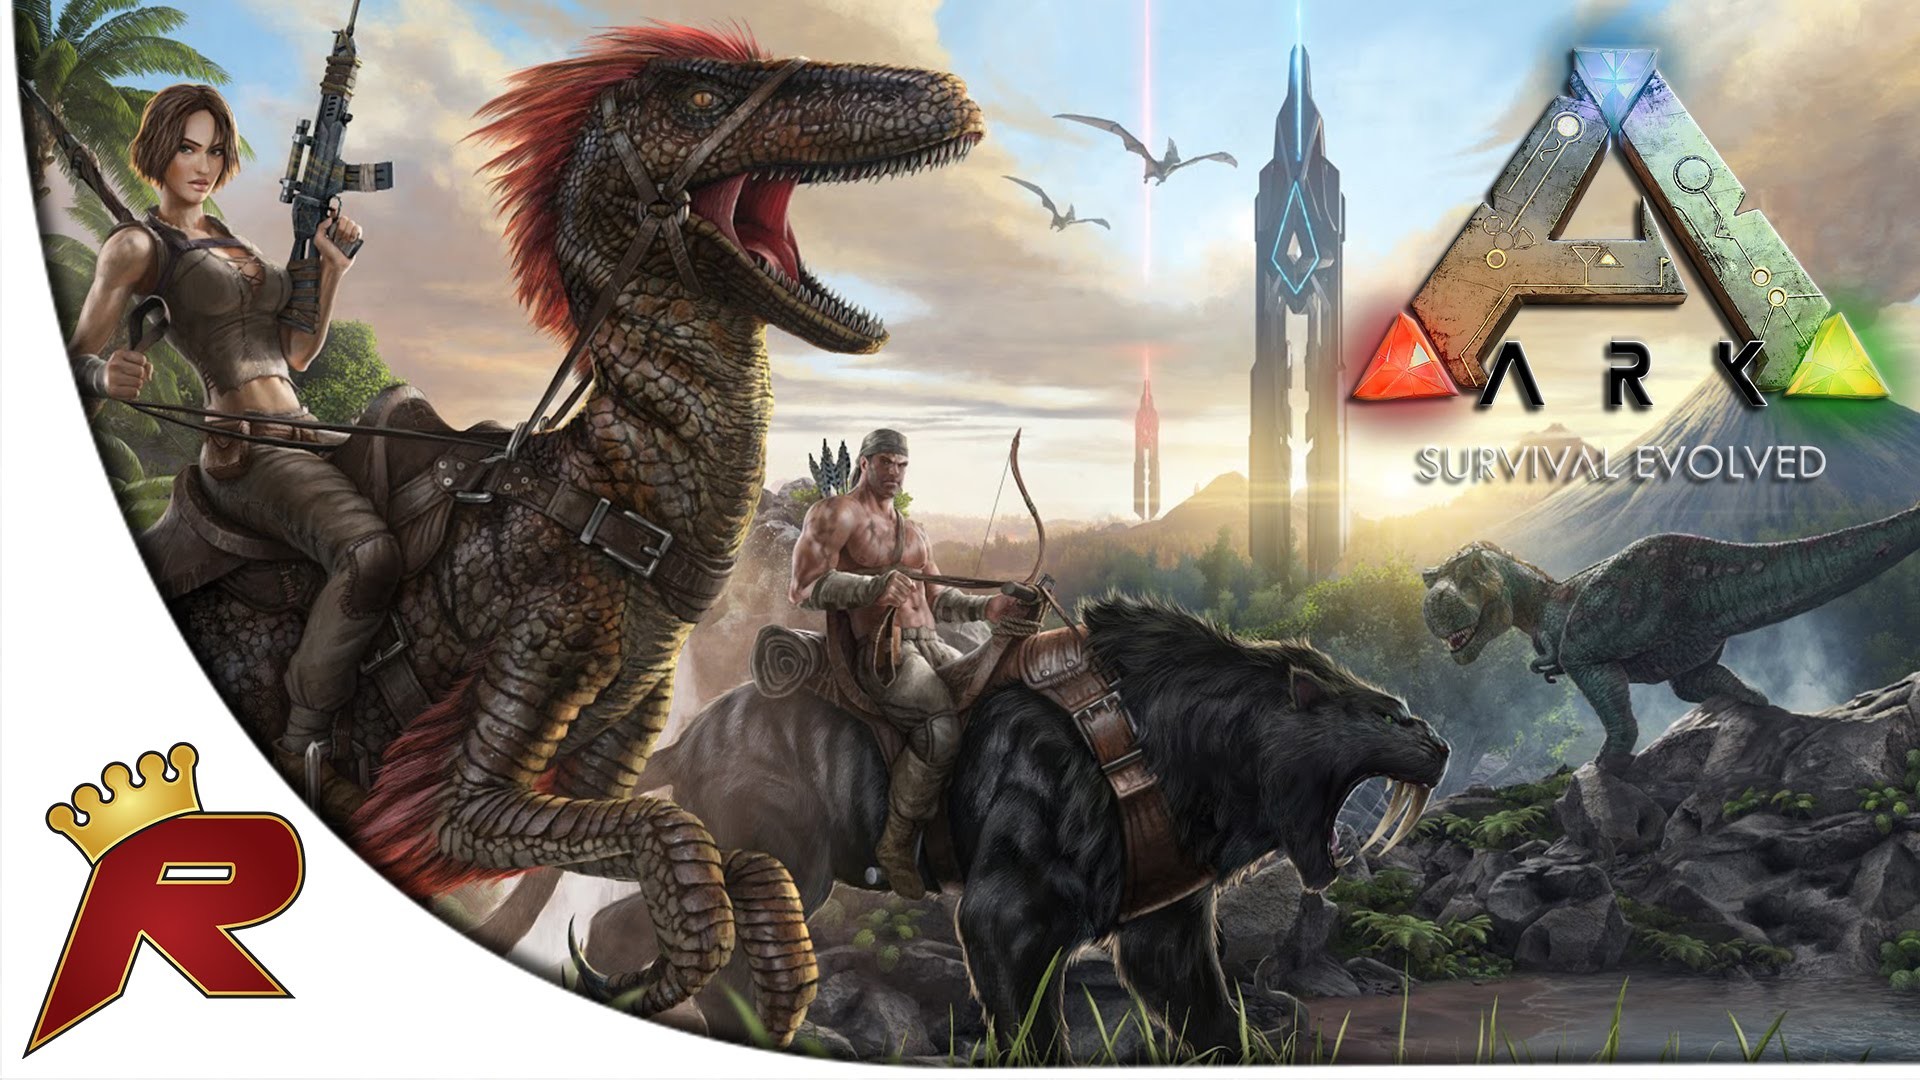 1920x1080 ARK: Survival Evolved Gameplay Footage - Screenshots and Trailer